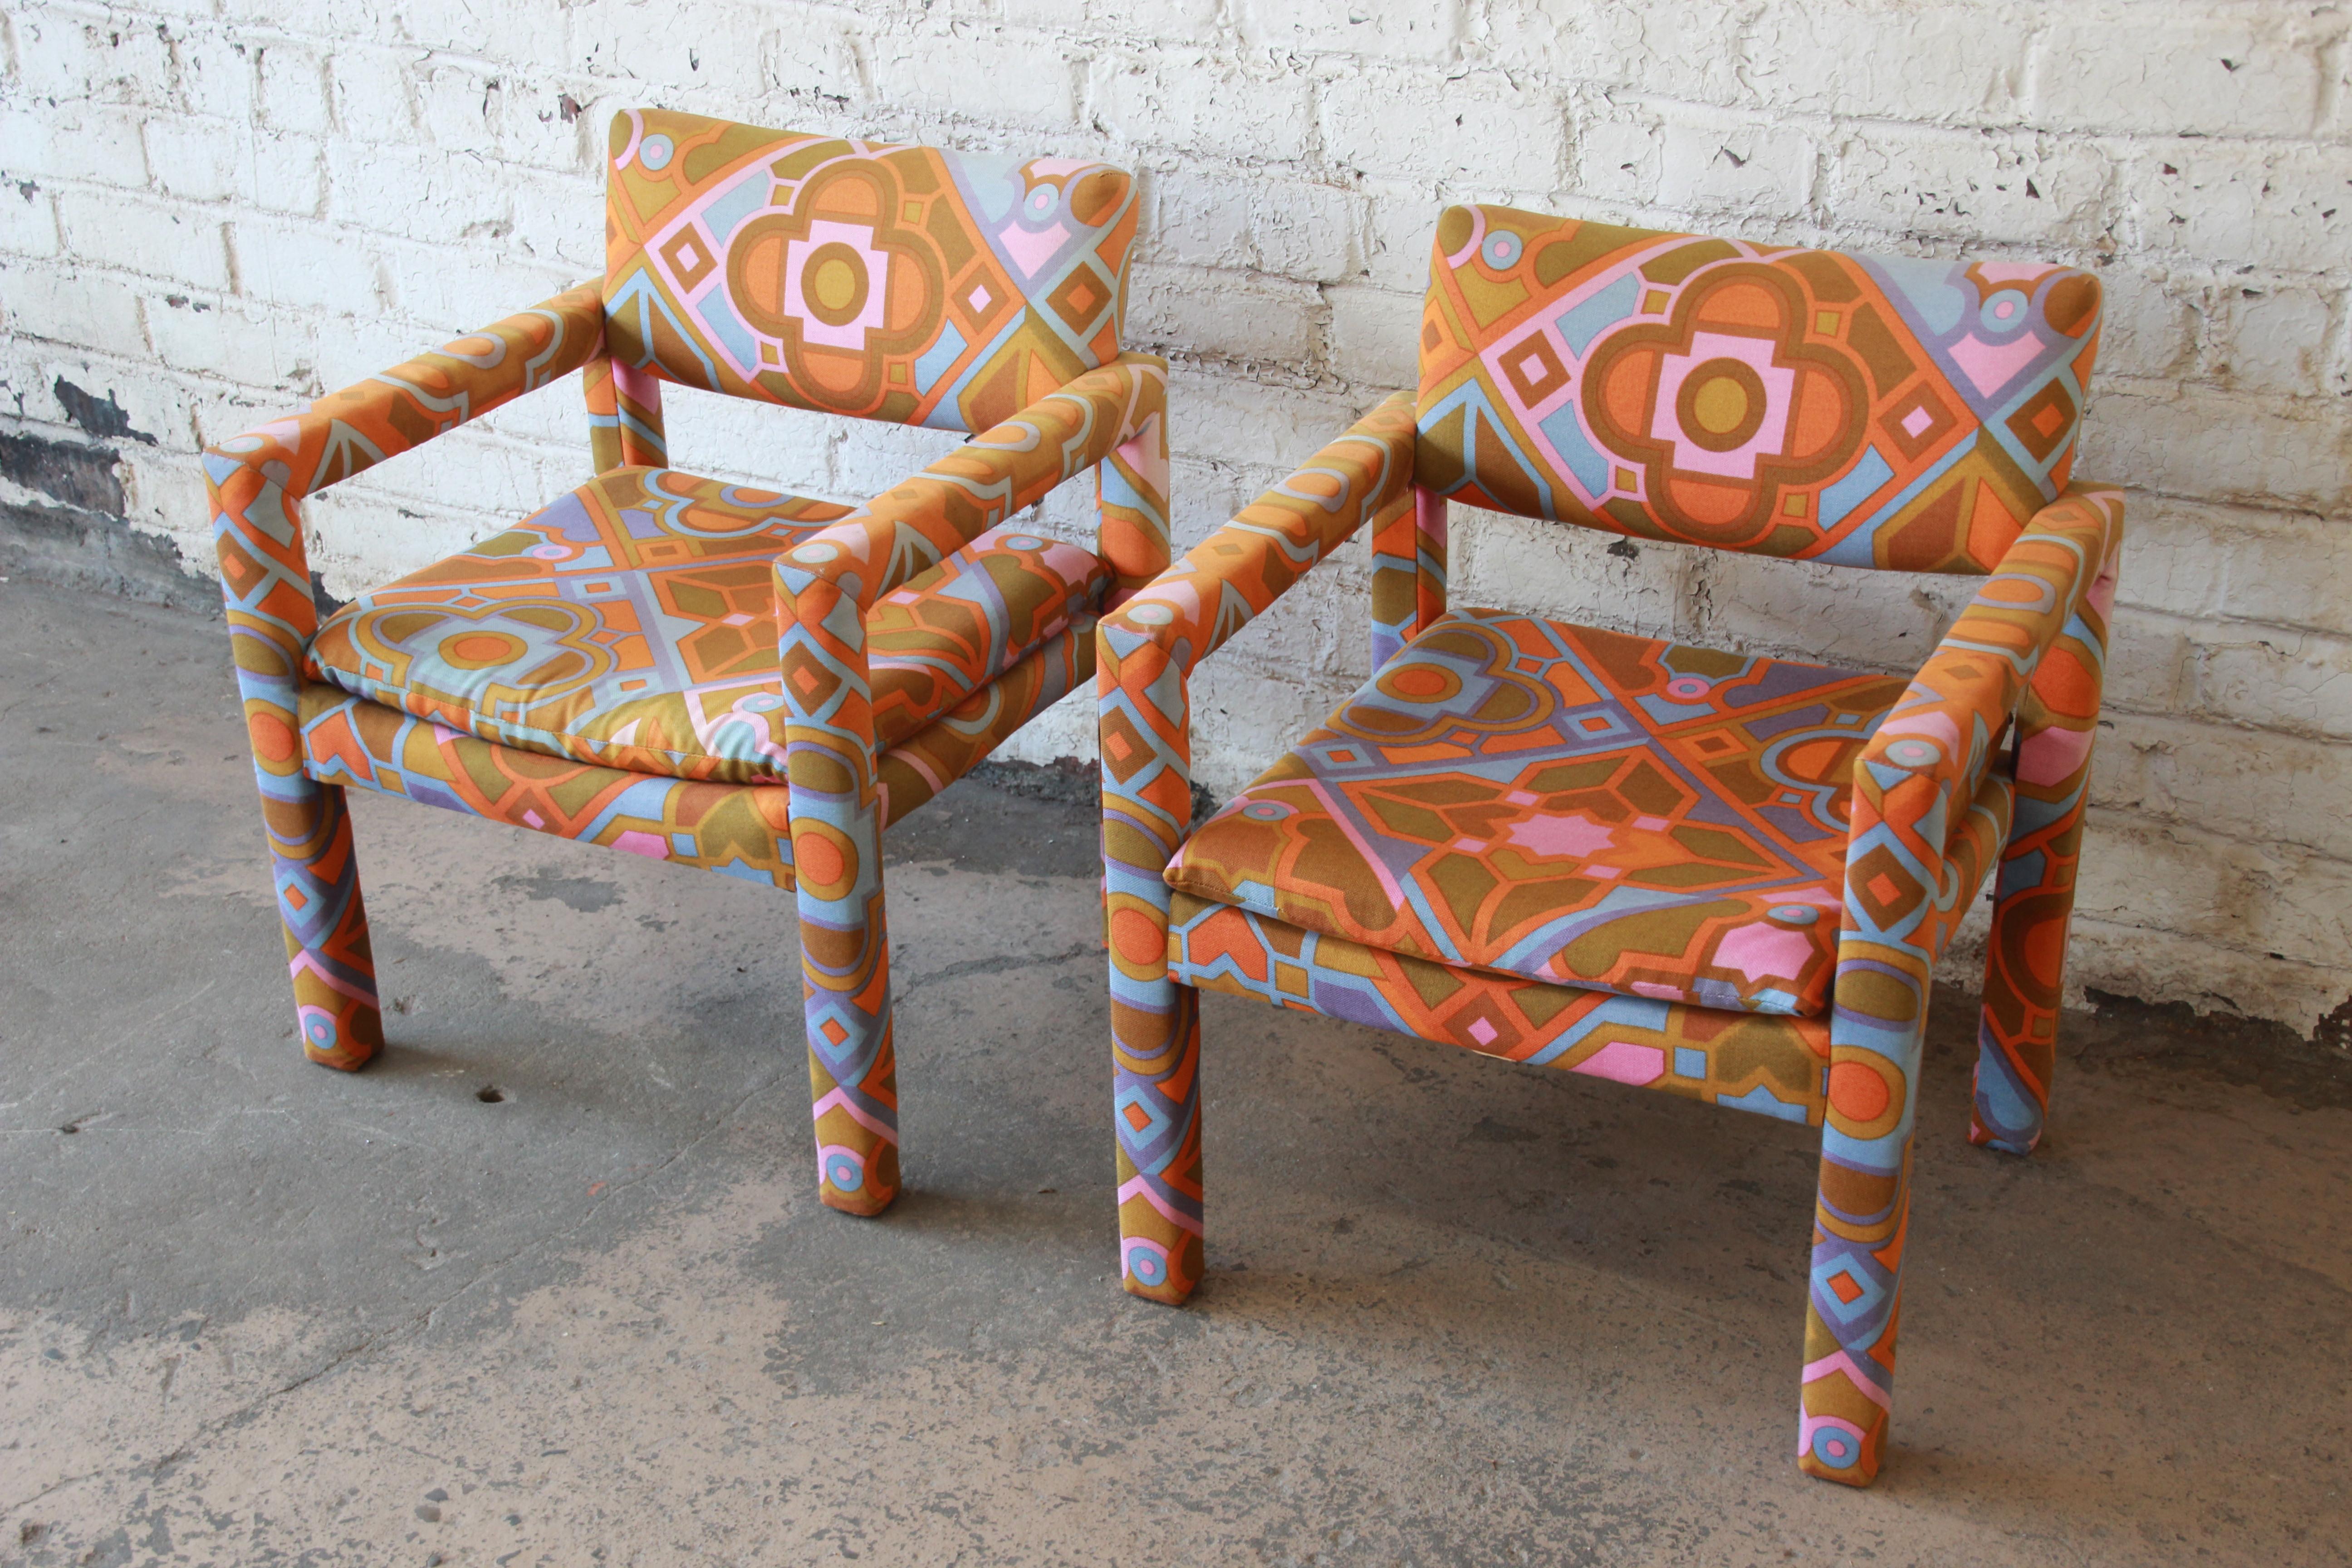 An exceptional pair of Parsons club chairs designed by Milo Baughman for Thayer Coggin. The chairs feature sleek mid-century modern design and outstanding Jack Lenor Larsen fabric. These are true statement pieces for any modern or Boho Chic